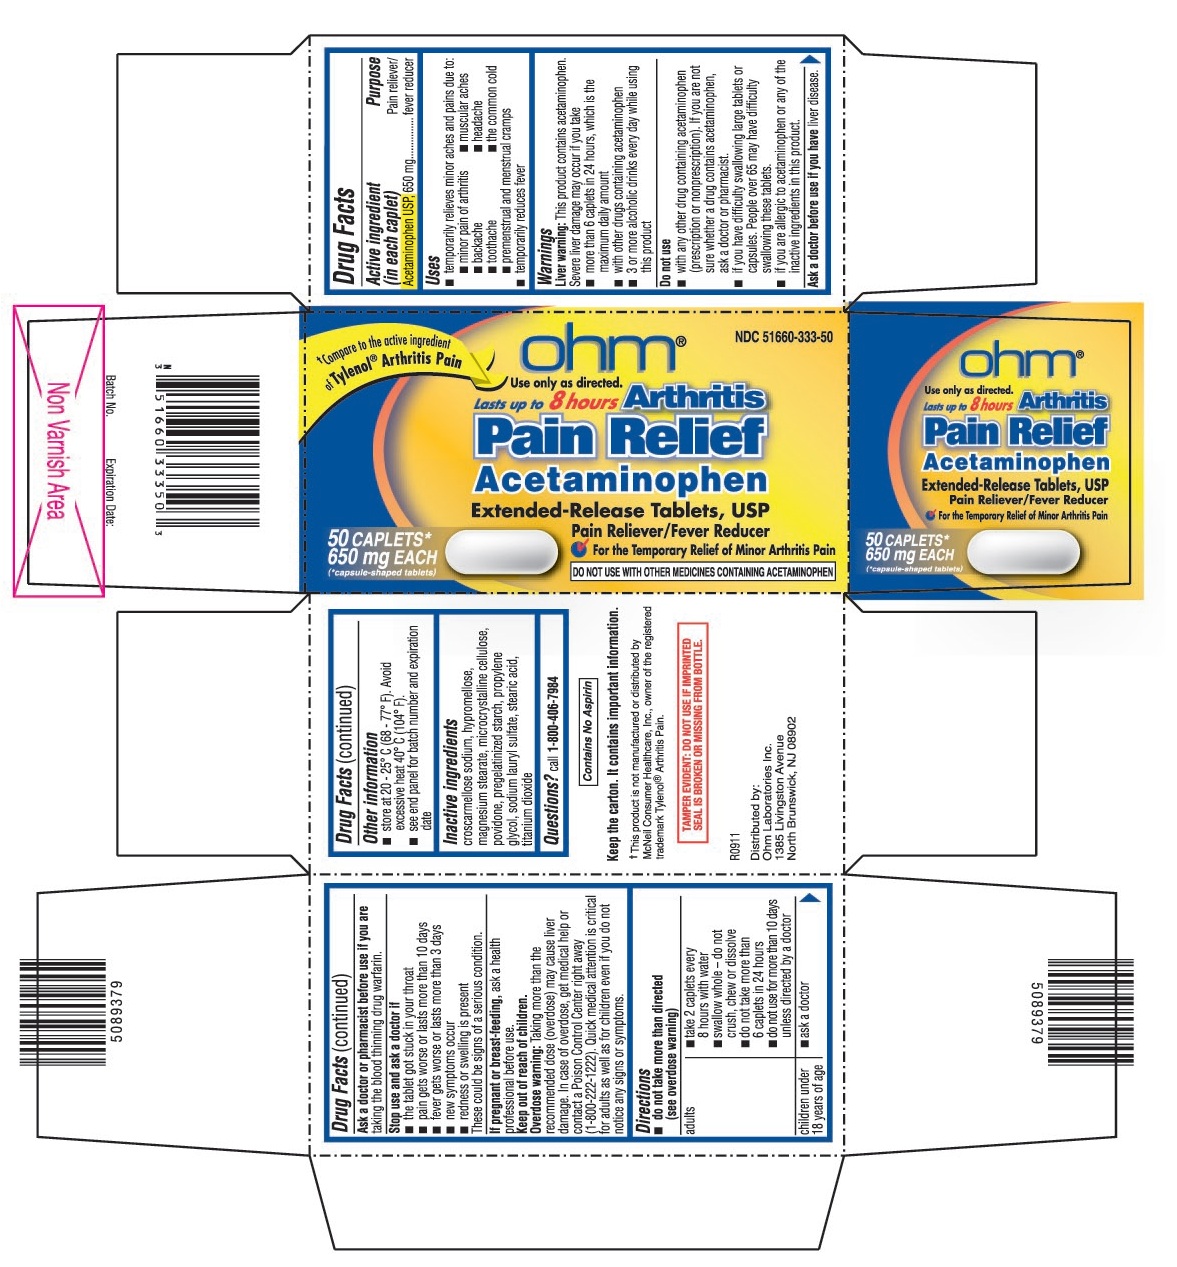 This is the 50 count bottle carton label for Acetaminophen extended-release tablets, USP.